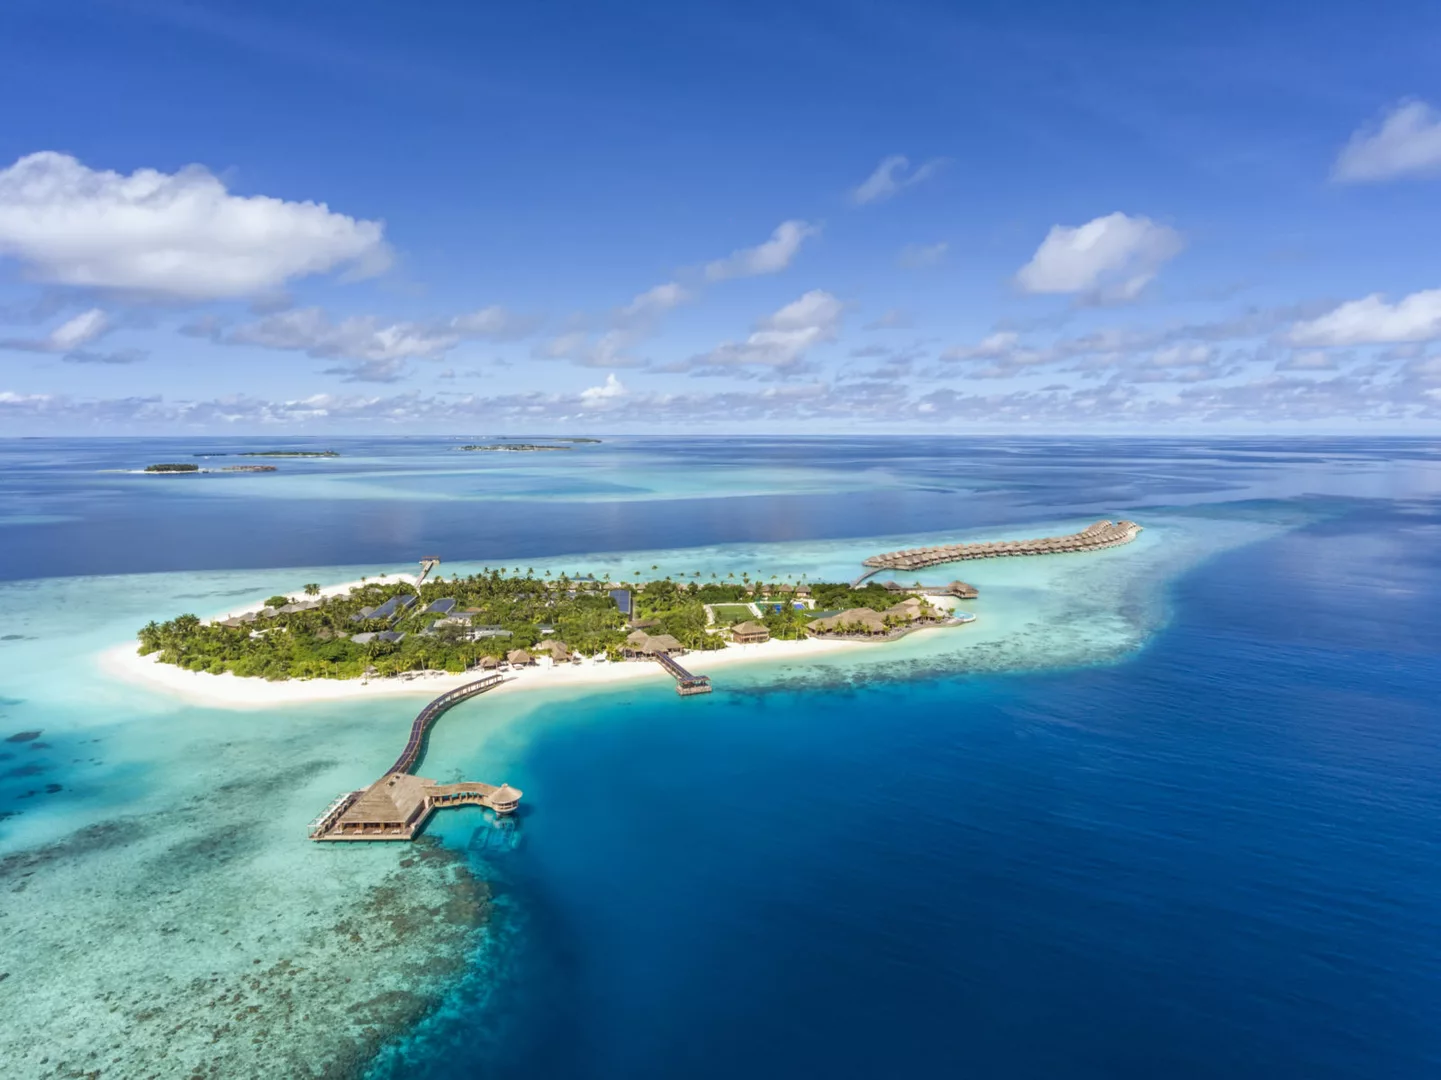 An aerial view of the Hurawalhi Island Resort, one of the best dive resorts in the Maldives